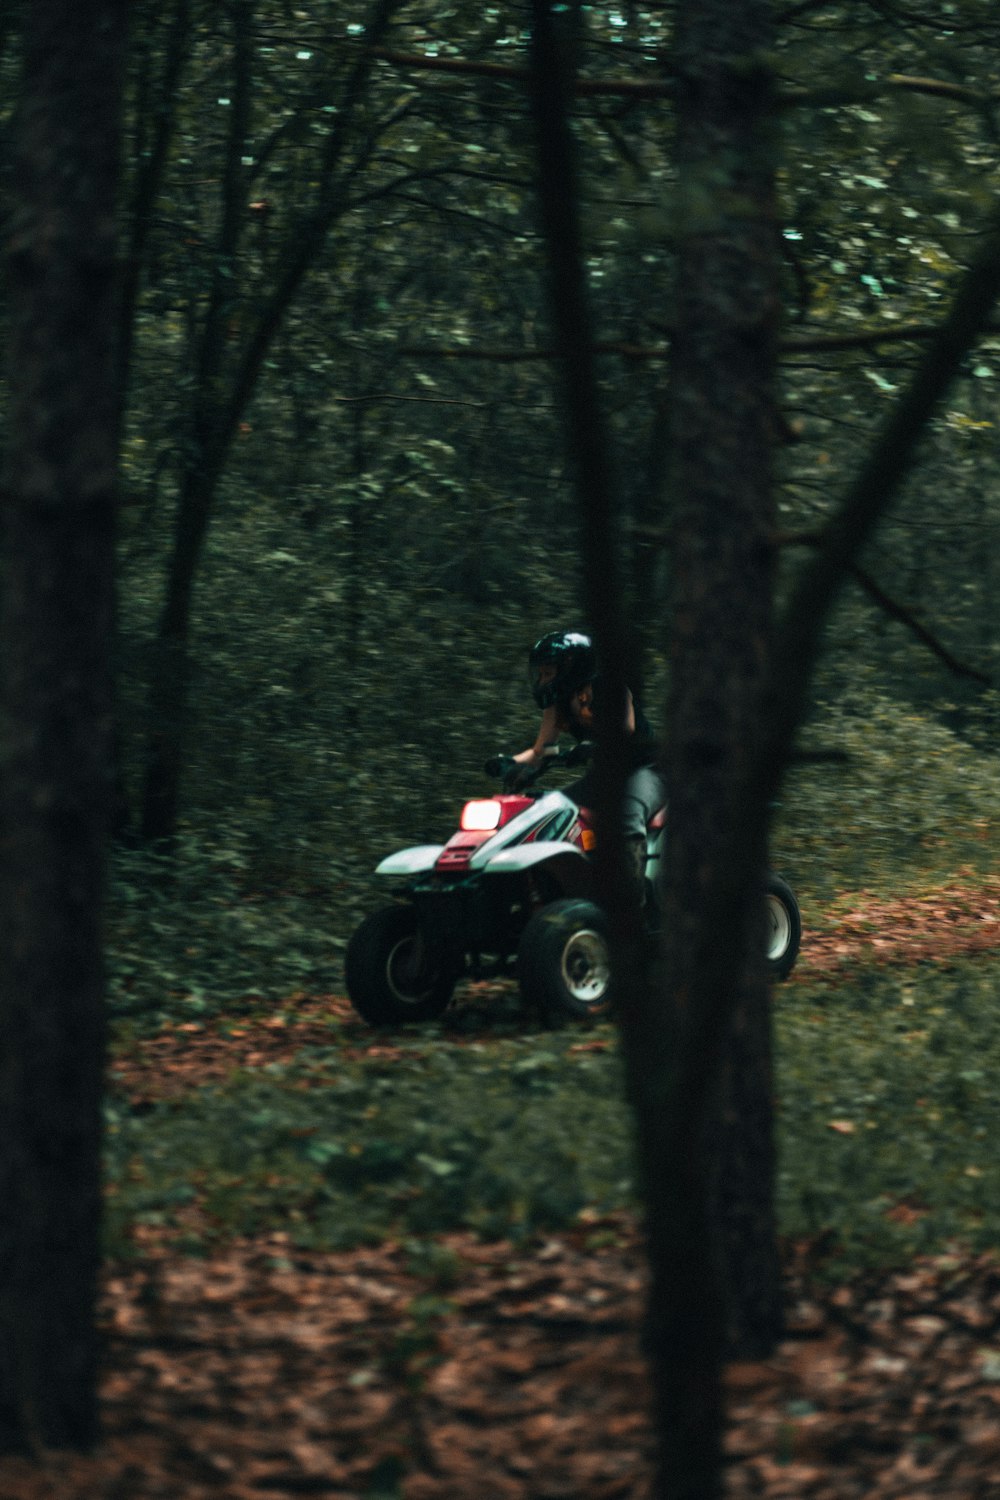 man riding on red and white atv in forest during daytime